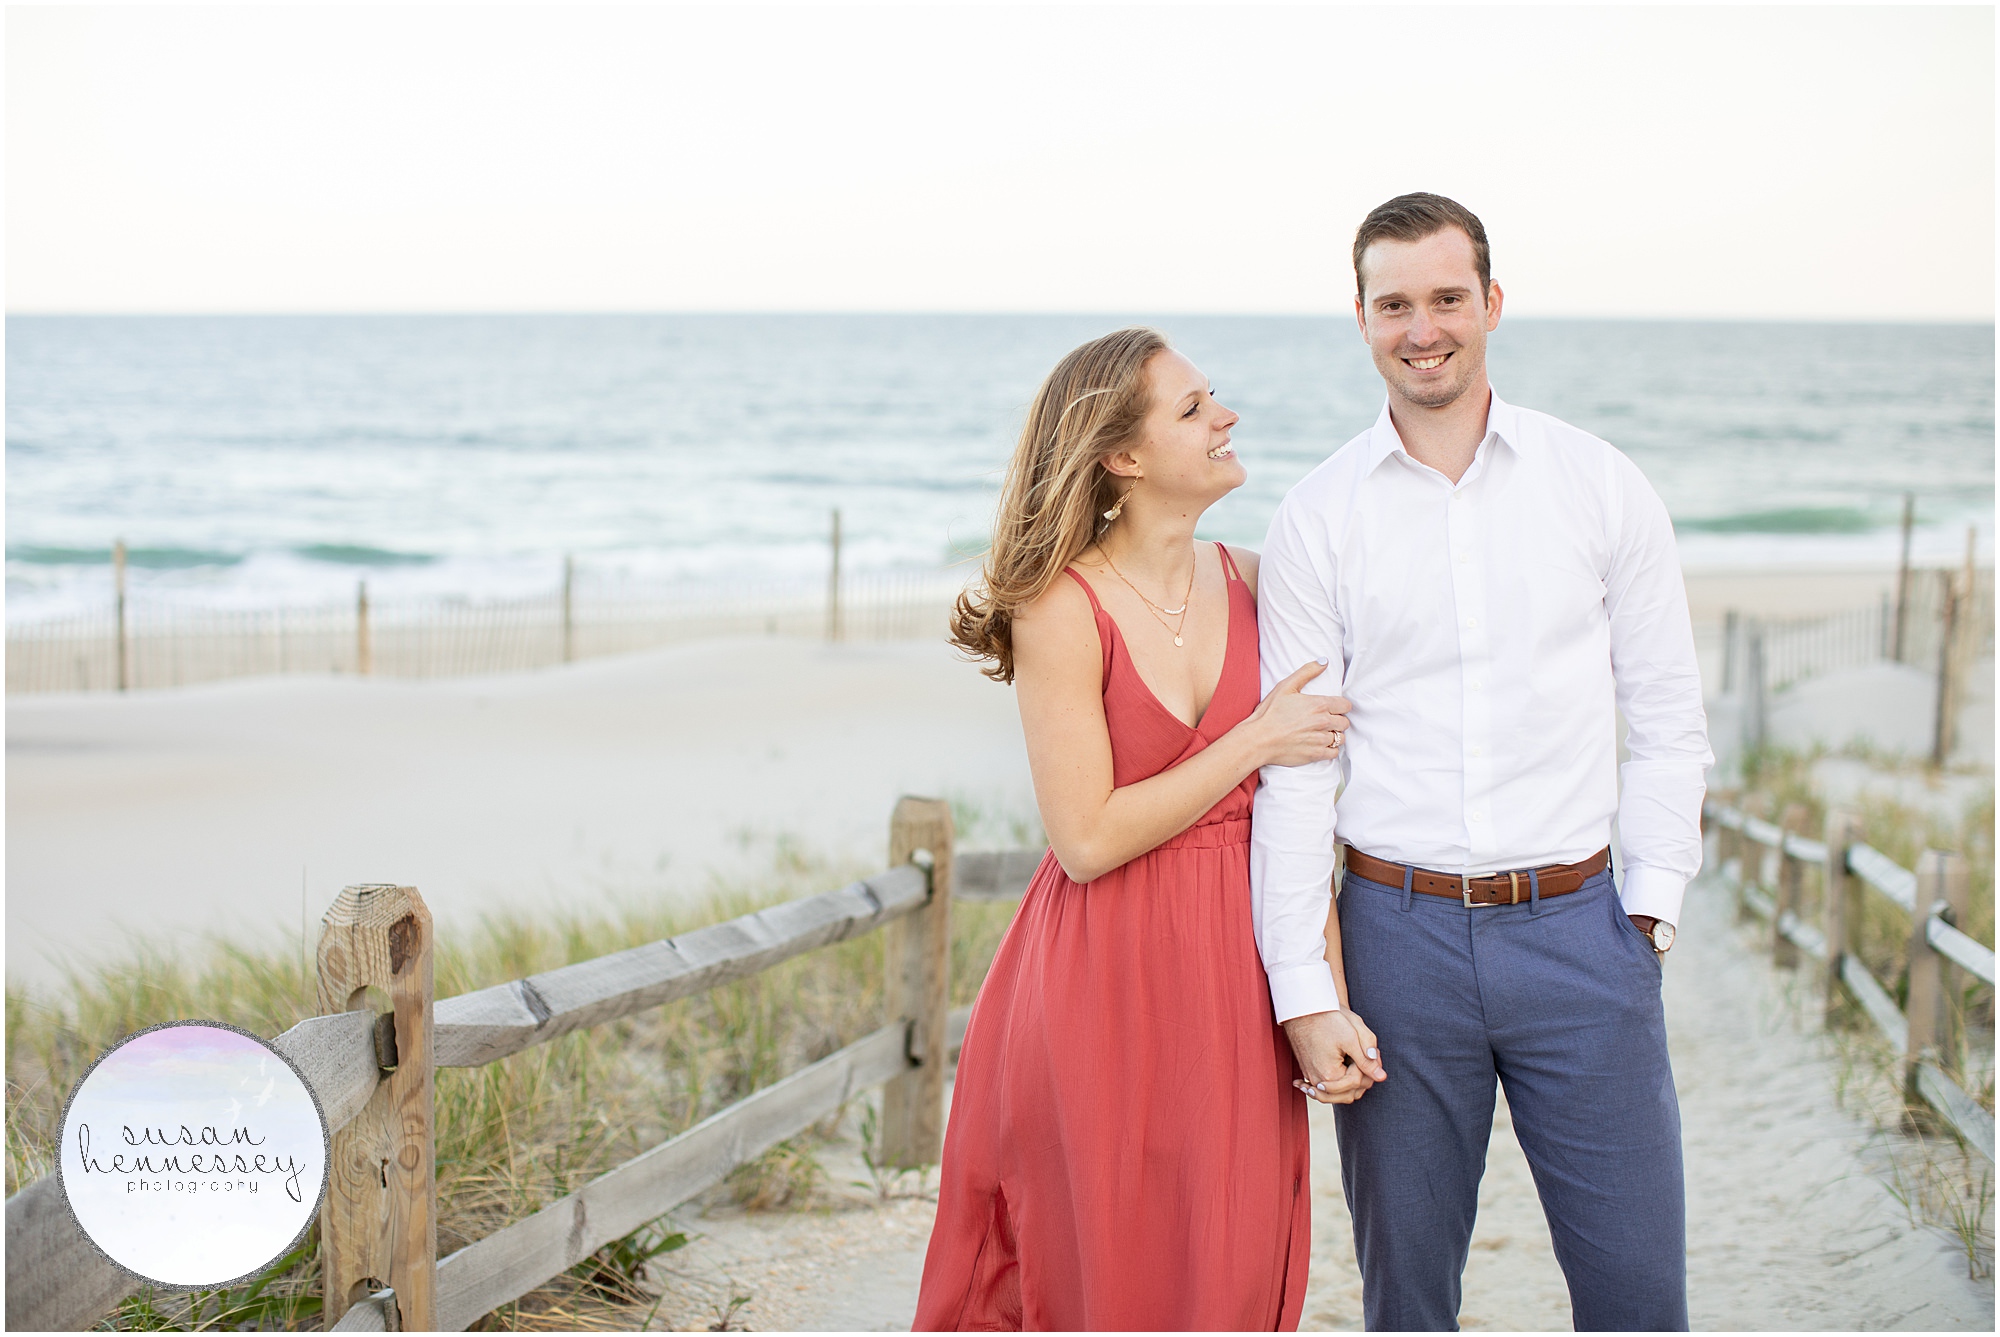 Engagement photography at the beach